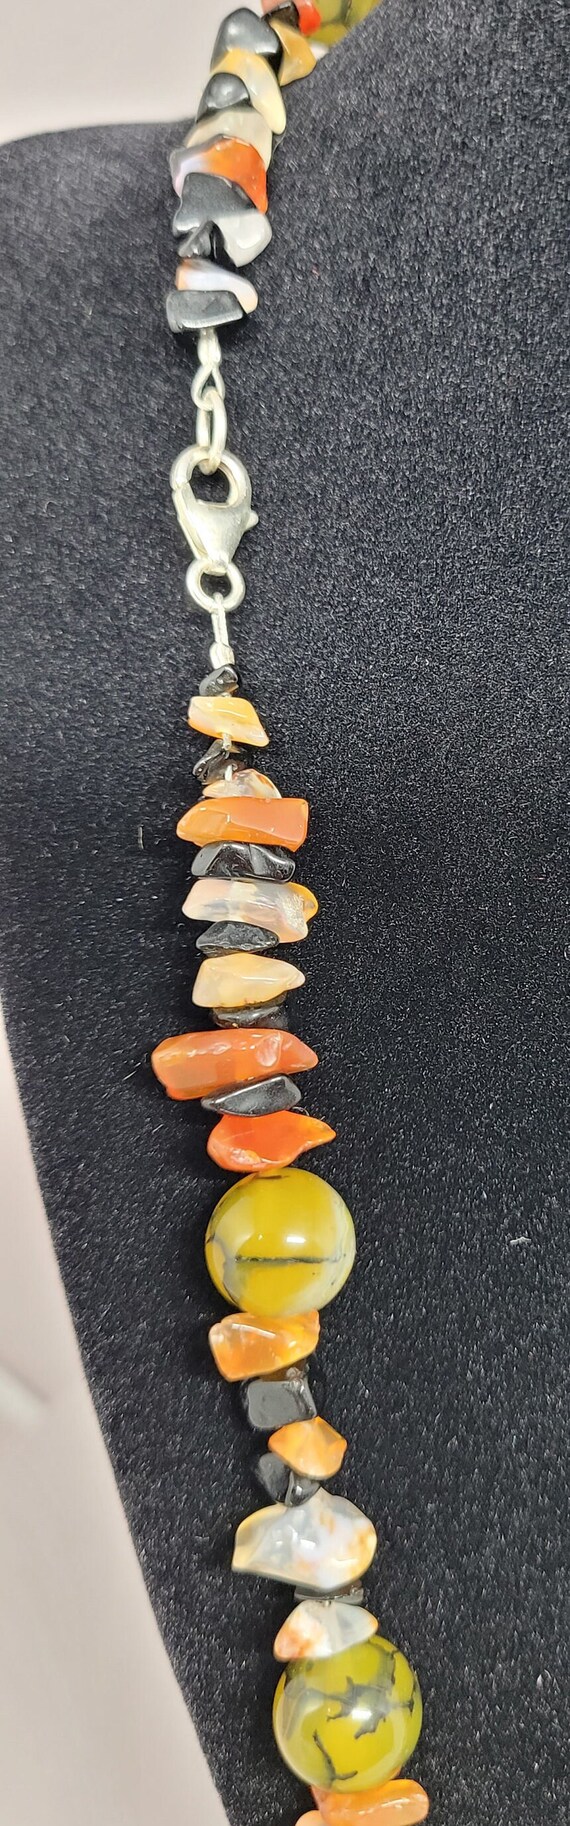 Amber Agate Beaded Necklace - image 4